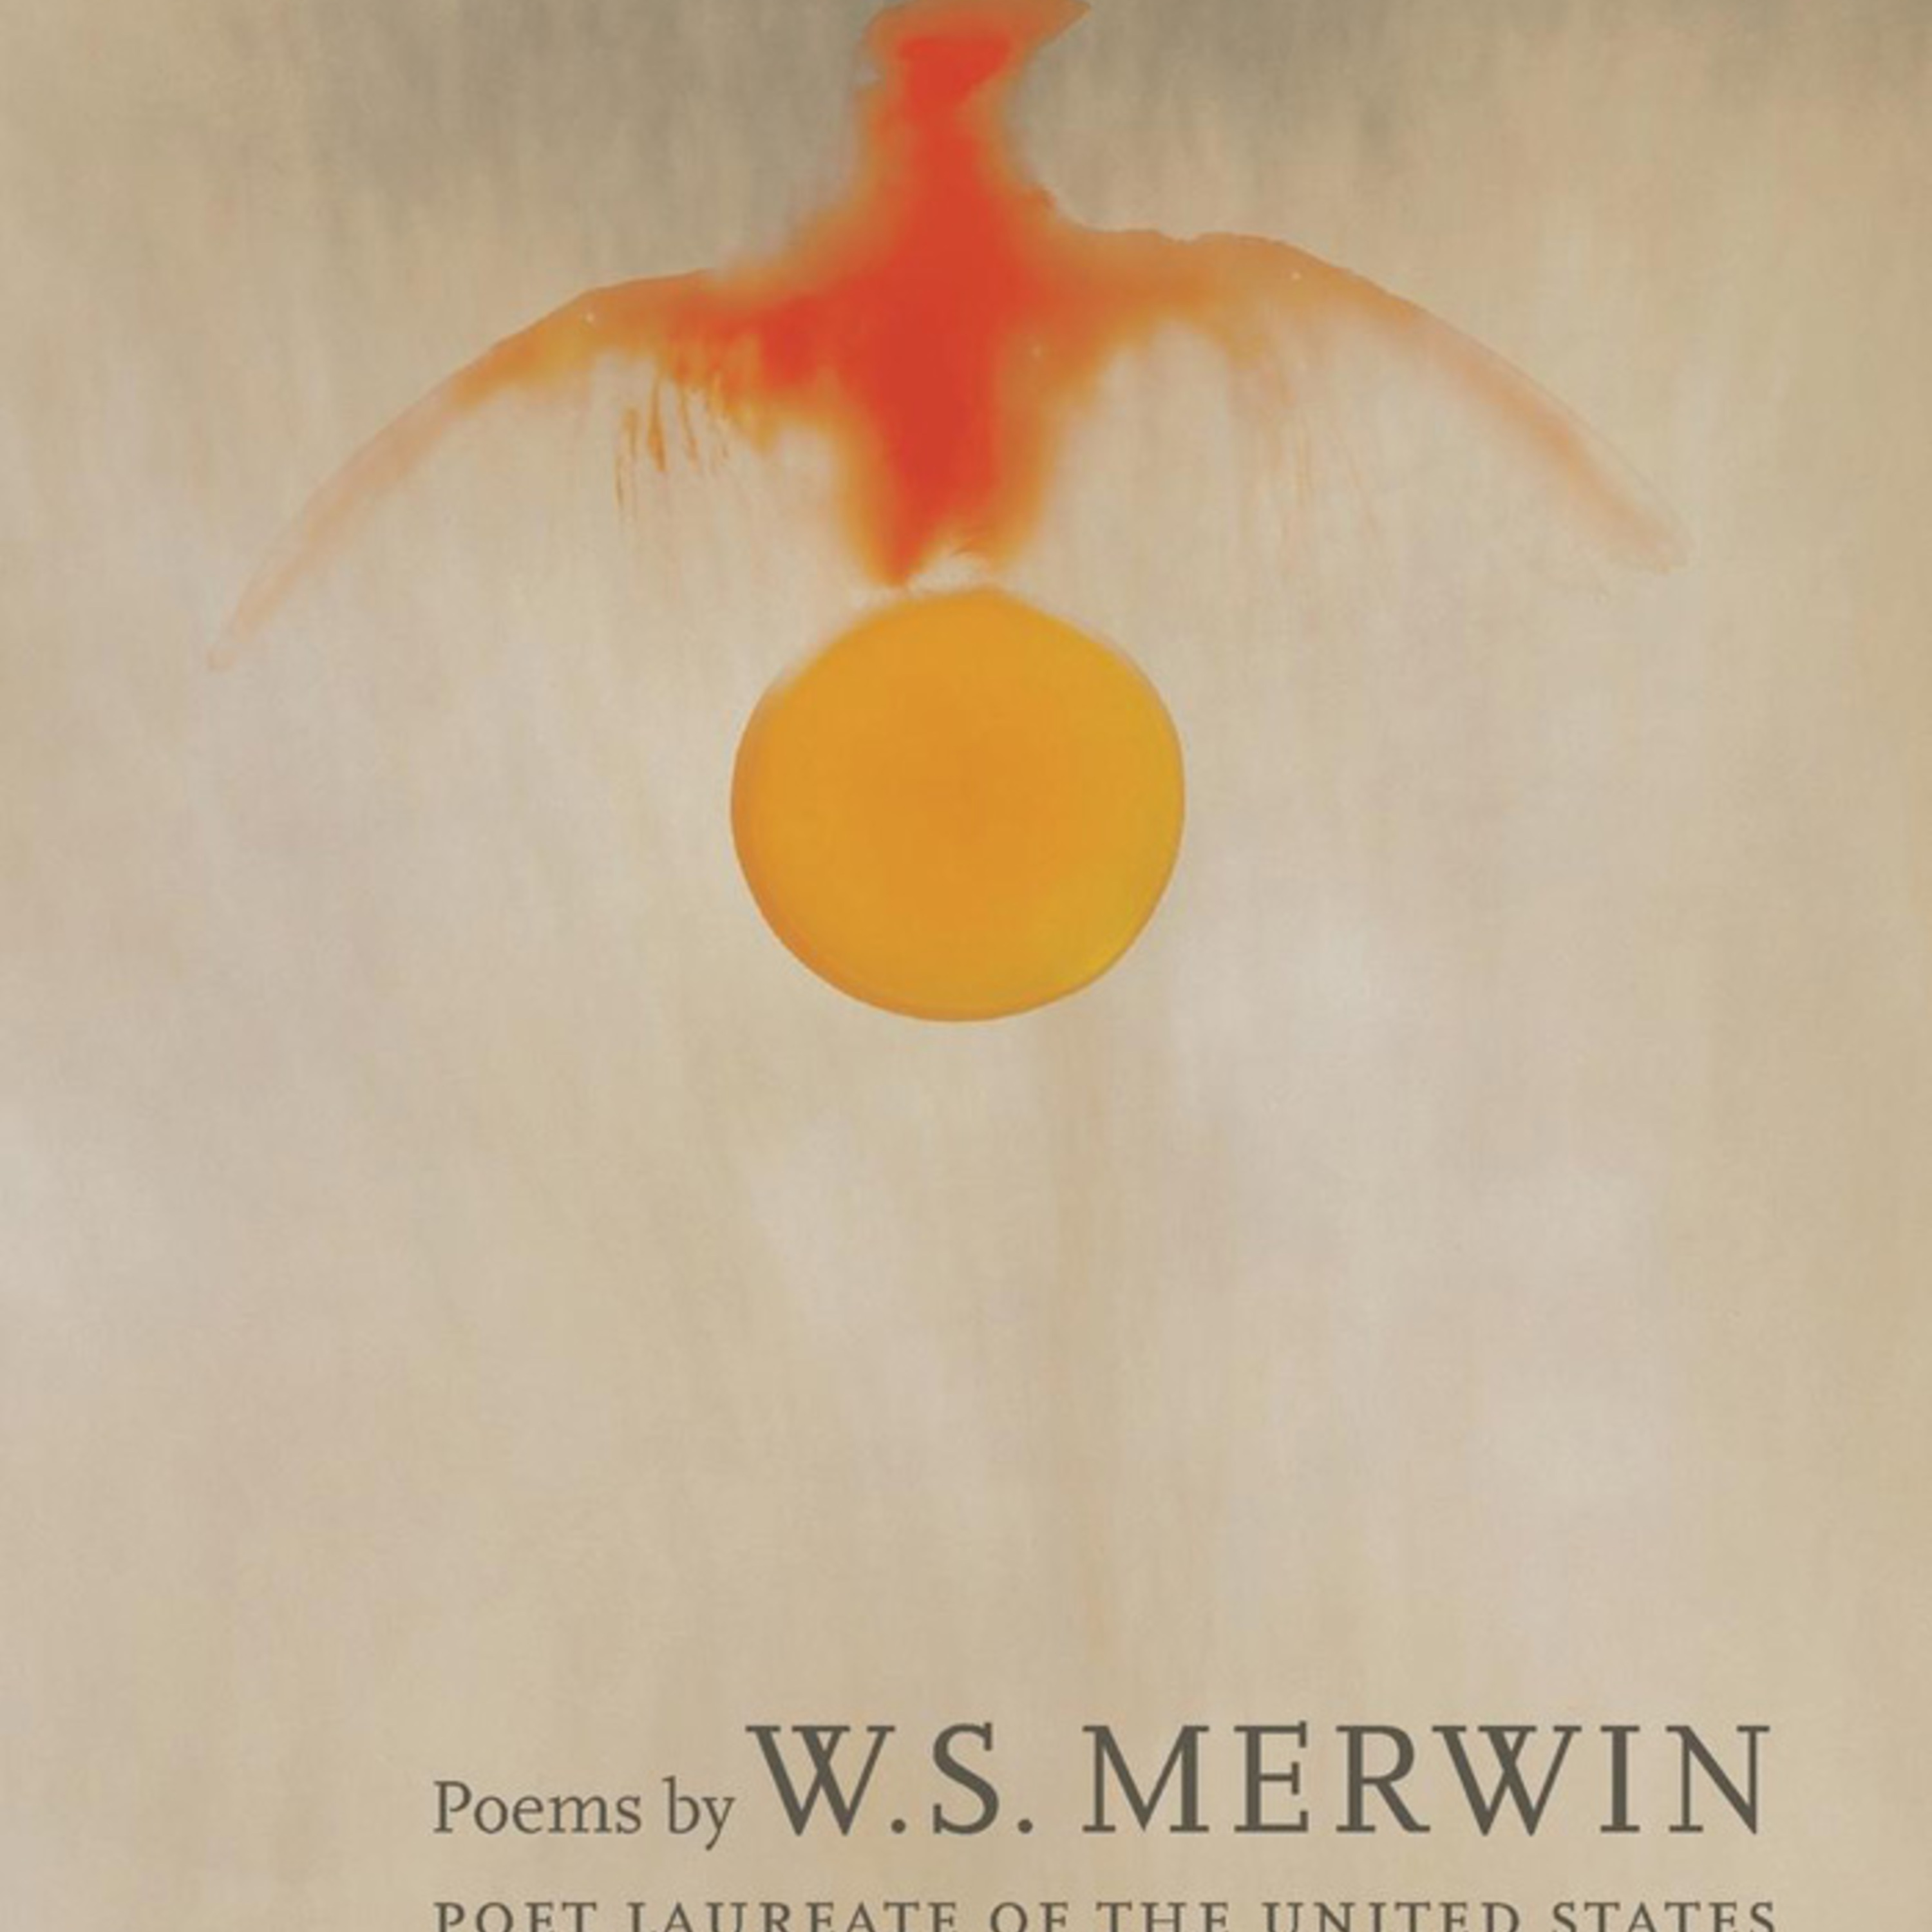 Episode 68: W.S. Merwin, To the New Year